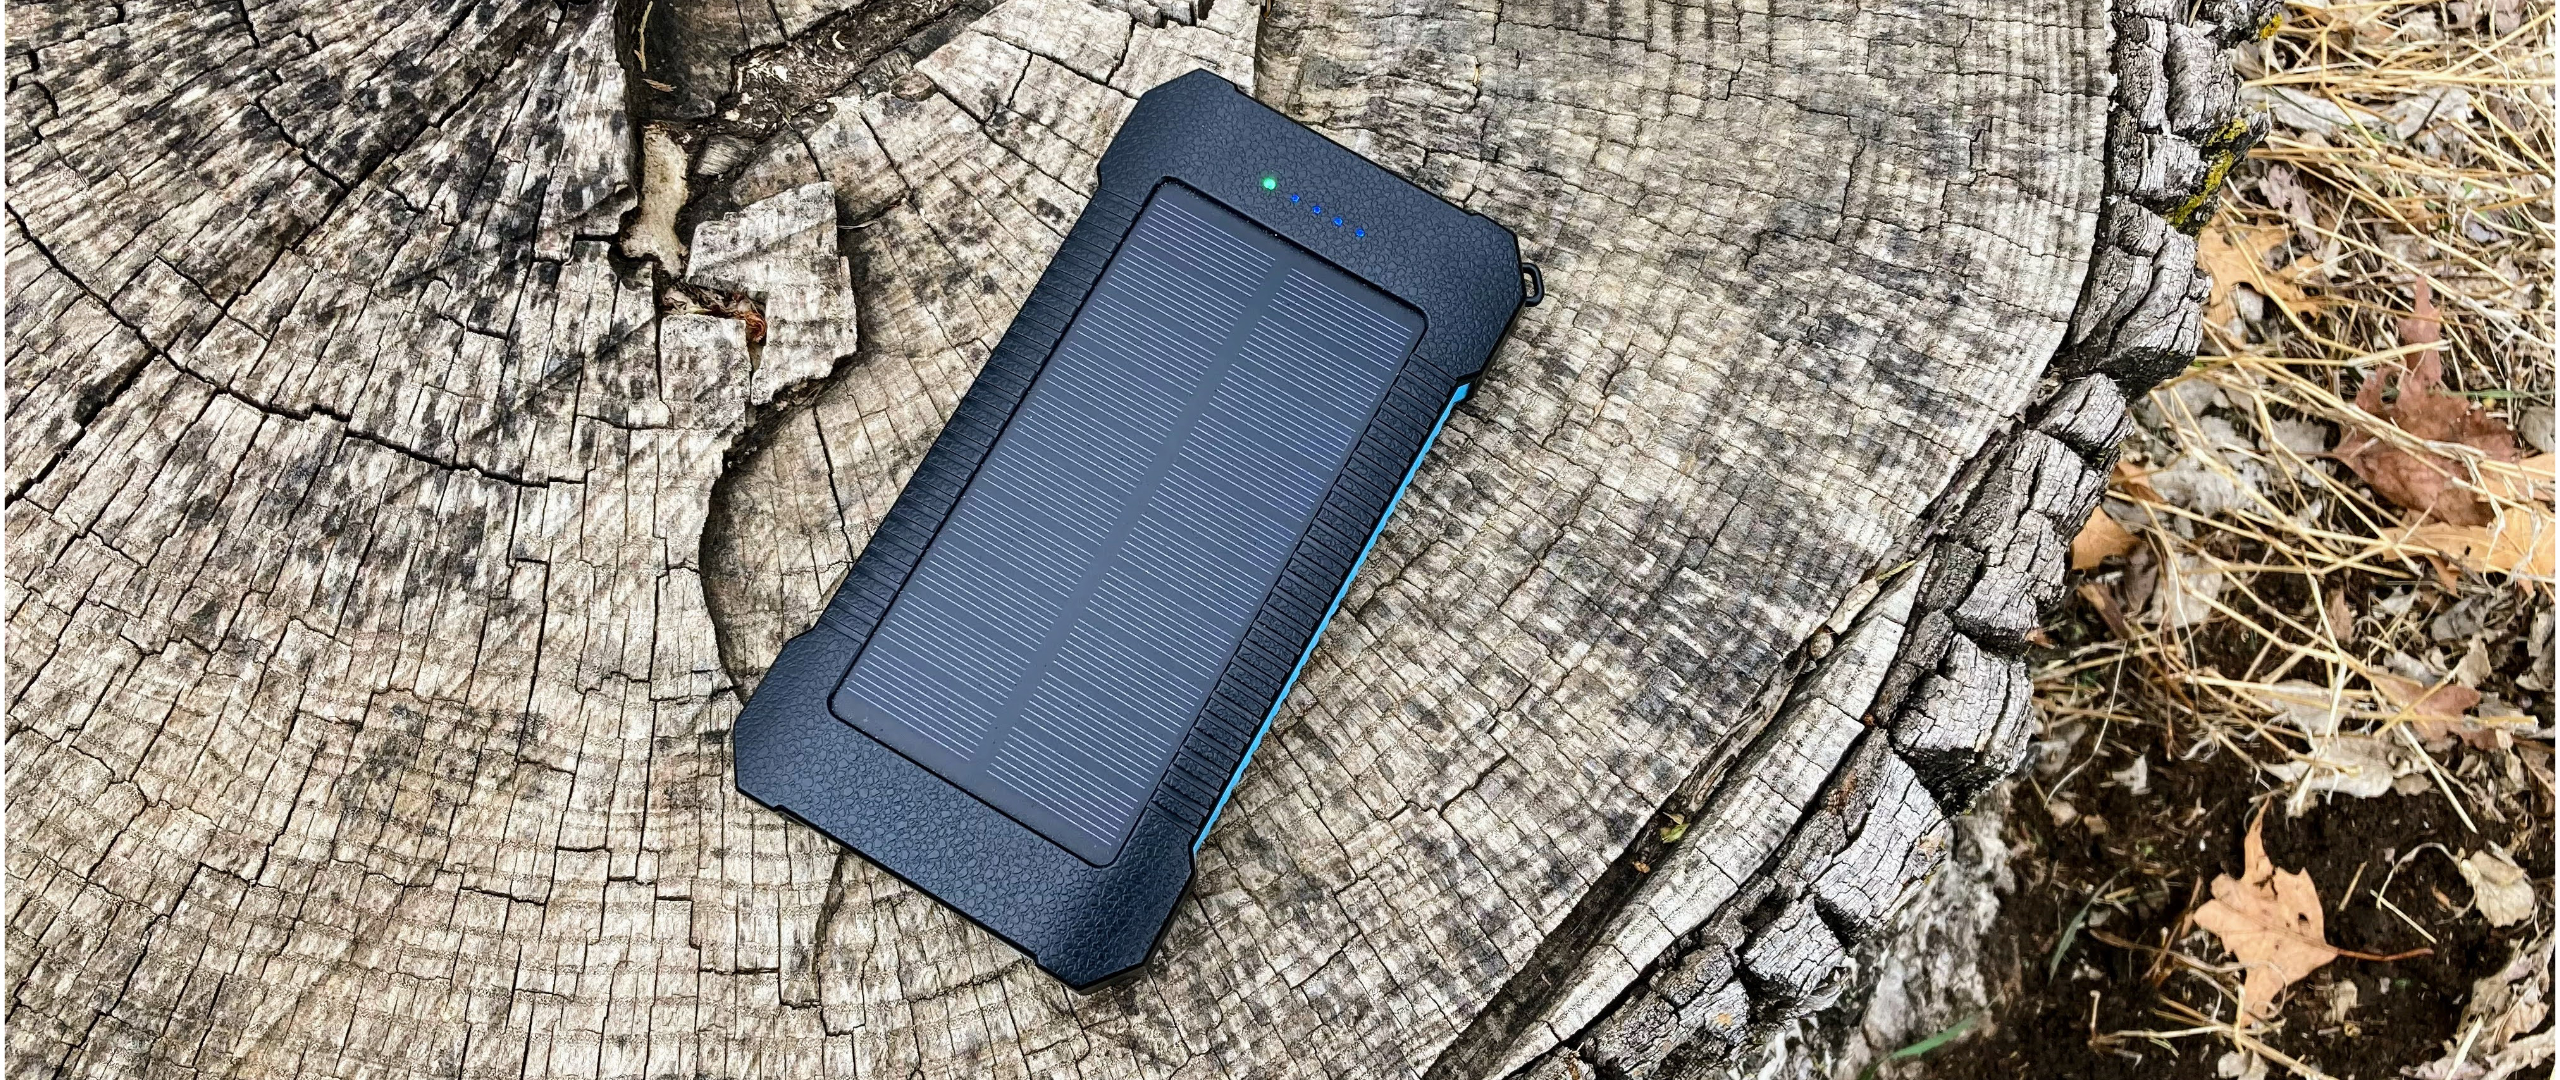 how-to-charge-solar-power-bank